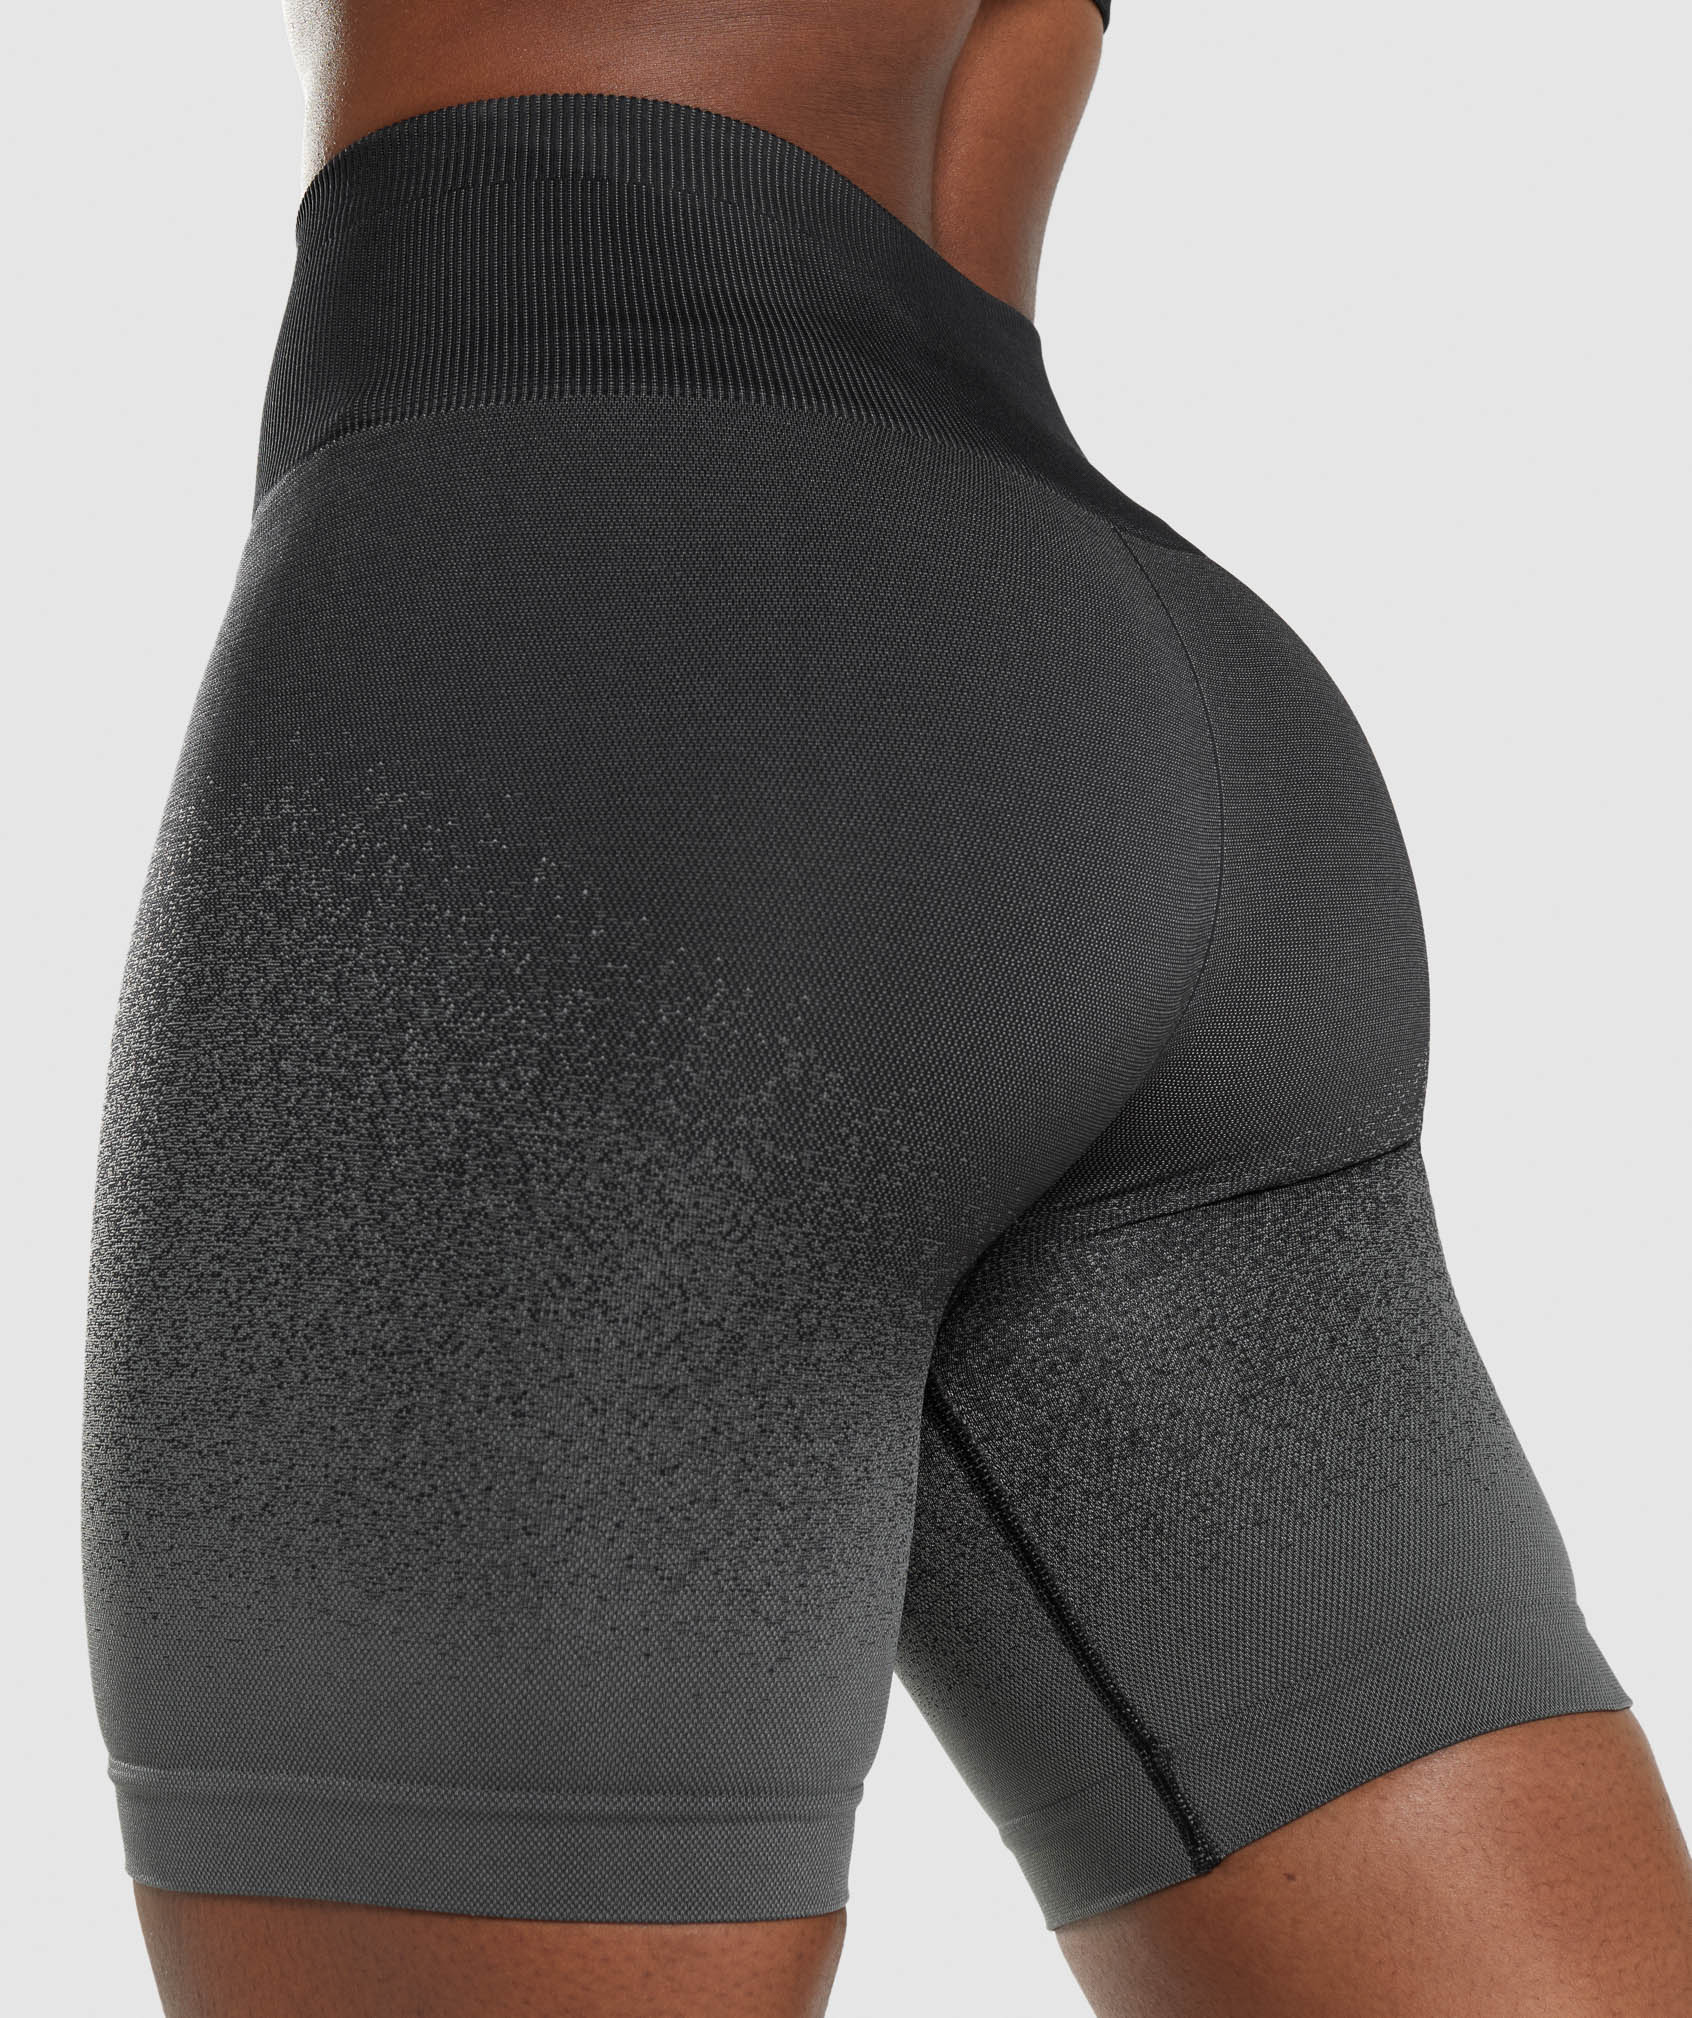 Adapt Ombre Seamless Cycling Shorts in Black/Grey - view 6